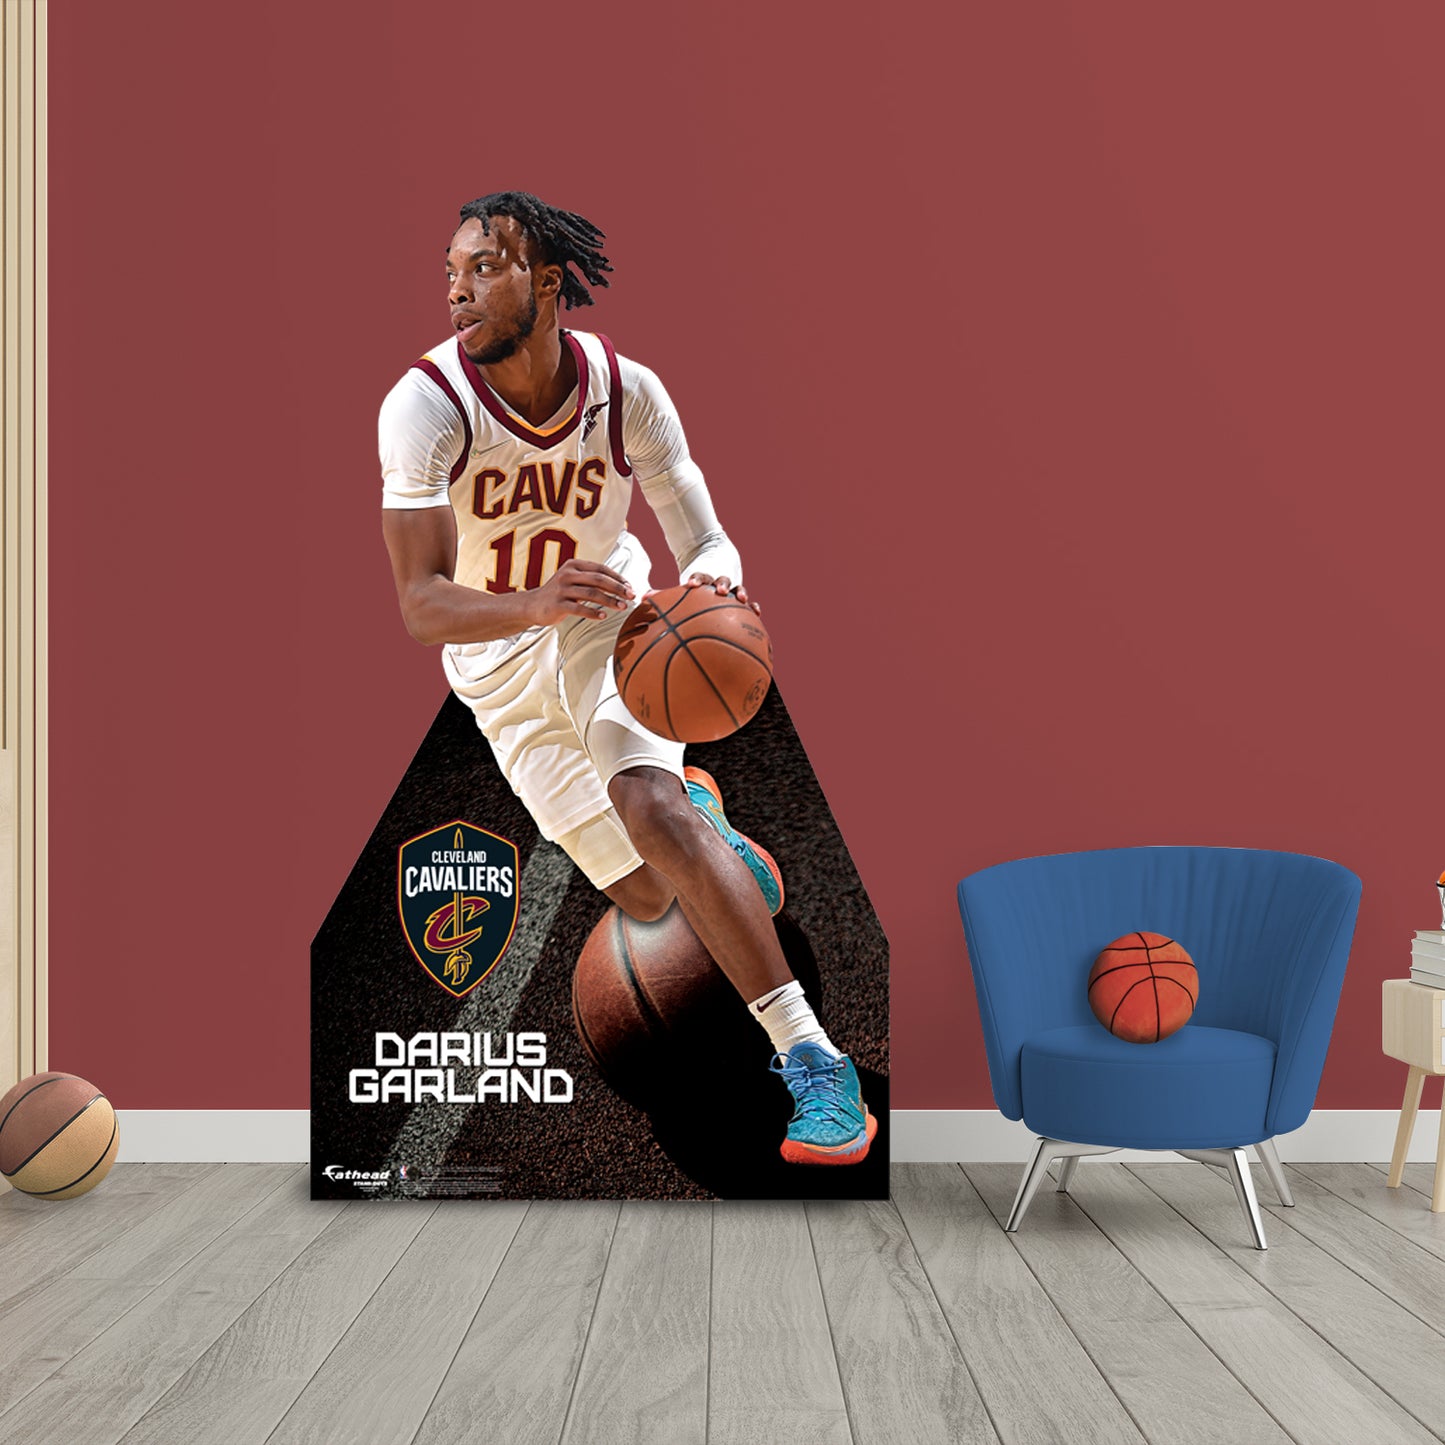 Cleveland Cavaliers: Darius Garland 2022  Life-Size   Foam Core Cutout  - Officially Licensed NBA    Stand Out